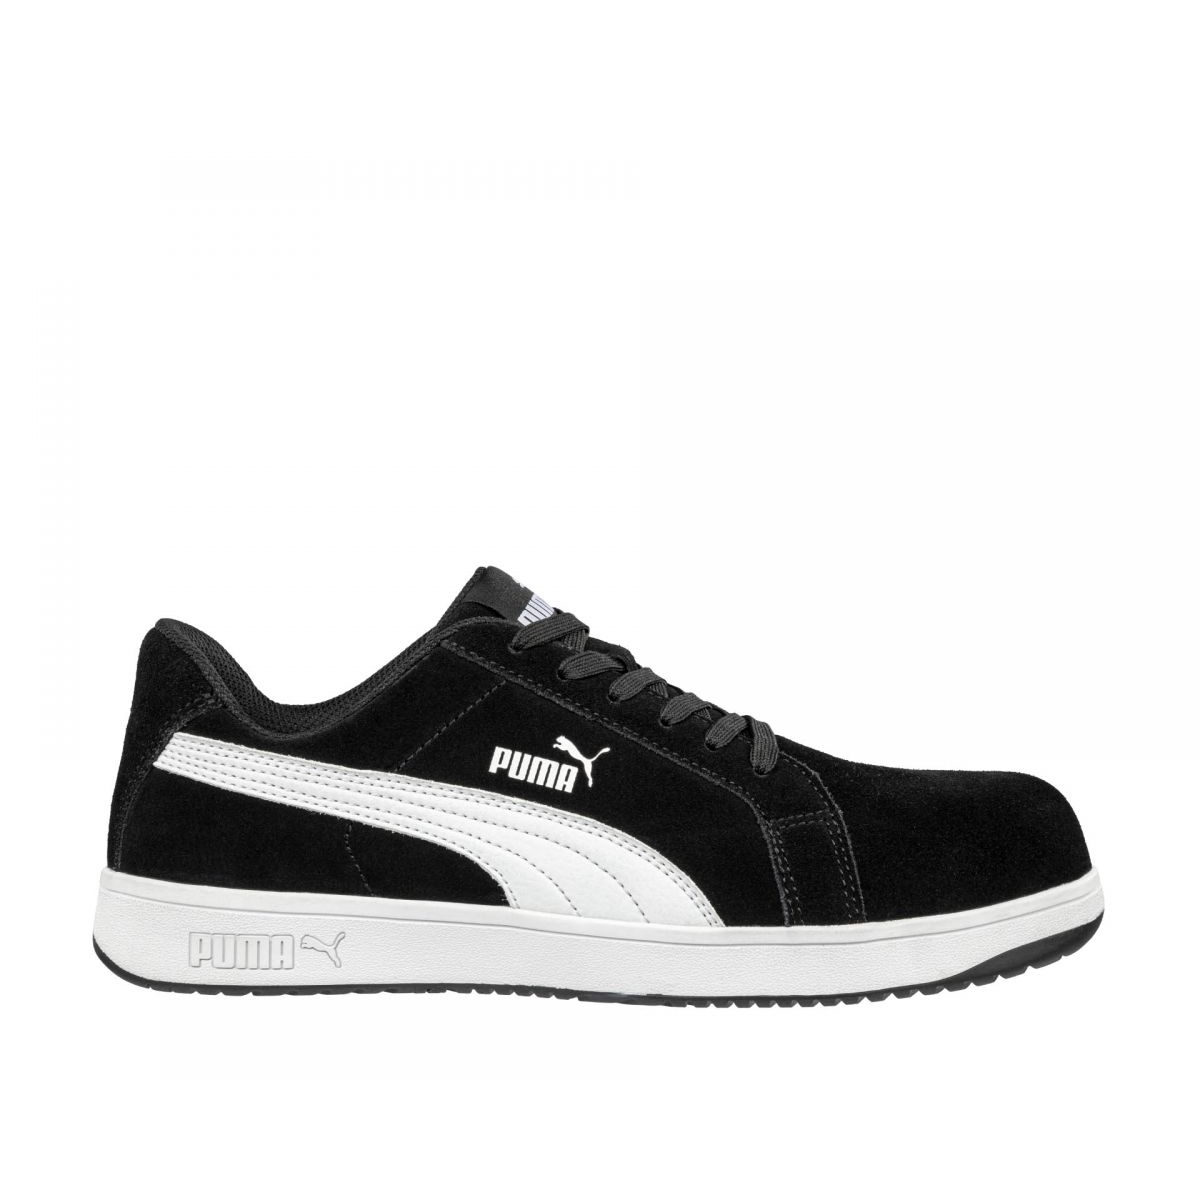 PUMA Safety Women's Iconic Low Composite Toe EH Work Shoes Black Suede - 640115 BLACK - BLACK, 8